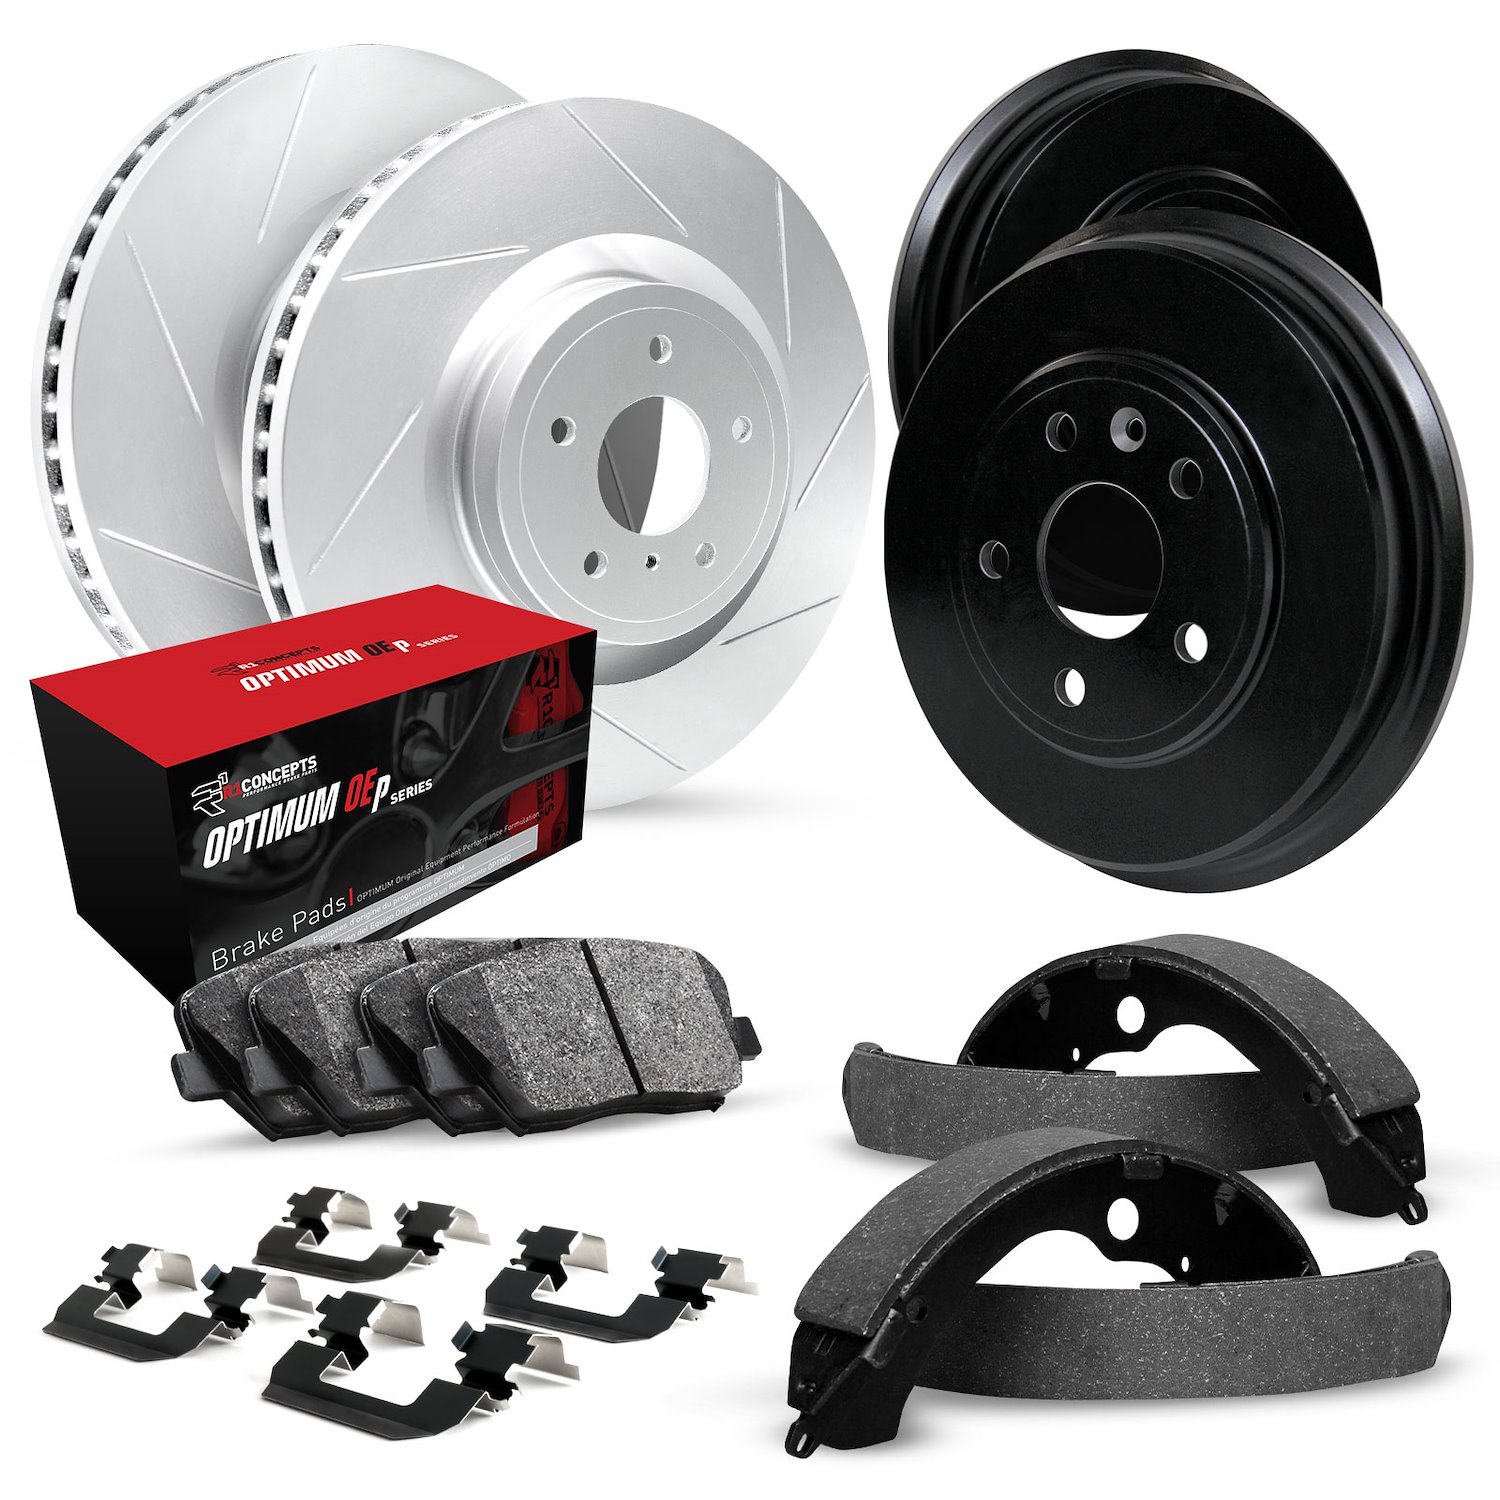 GEO-Carbon Slotted Brake Rotor & Drum Set w/Optimum OE Pads, Shoes, & Hardware, 1986-1987 Ford/Lincoln/Mercury/Mazda